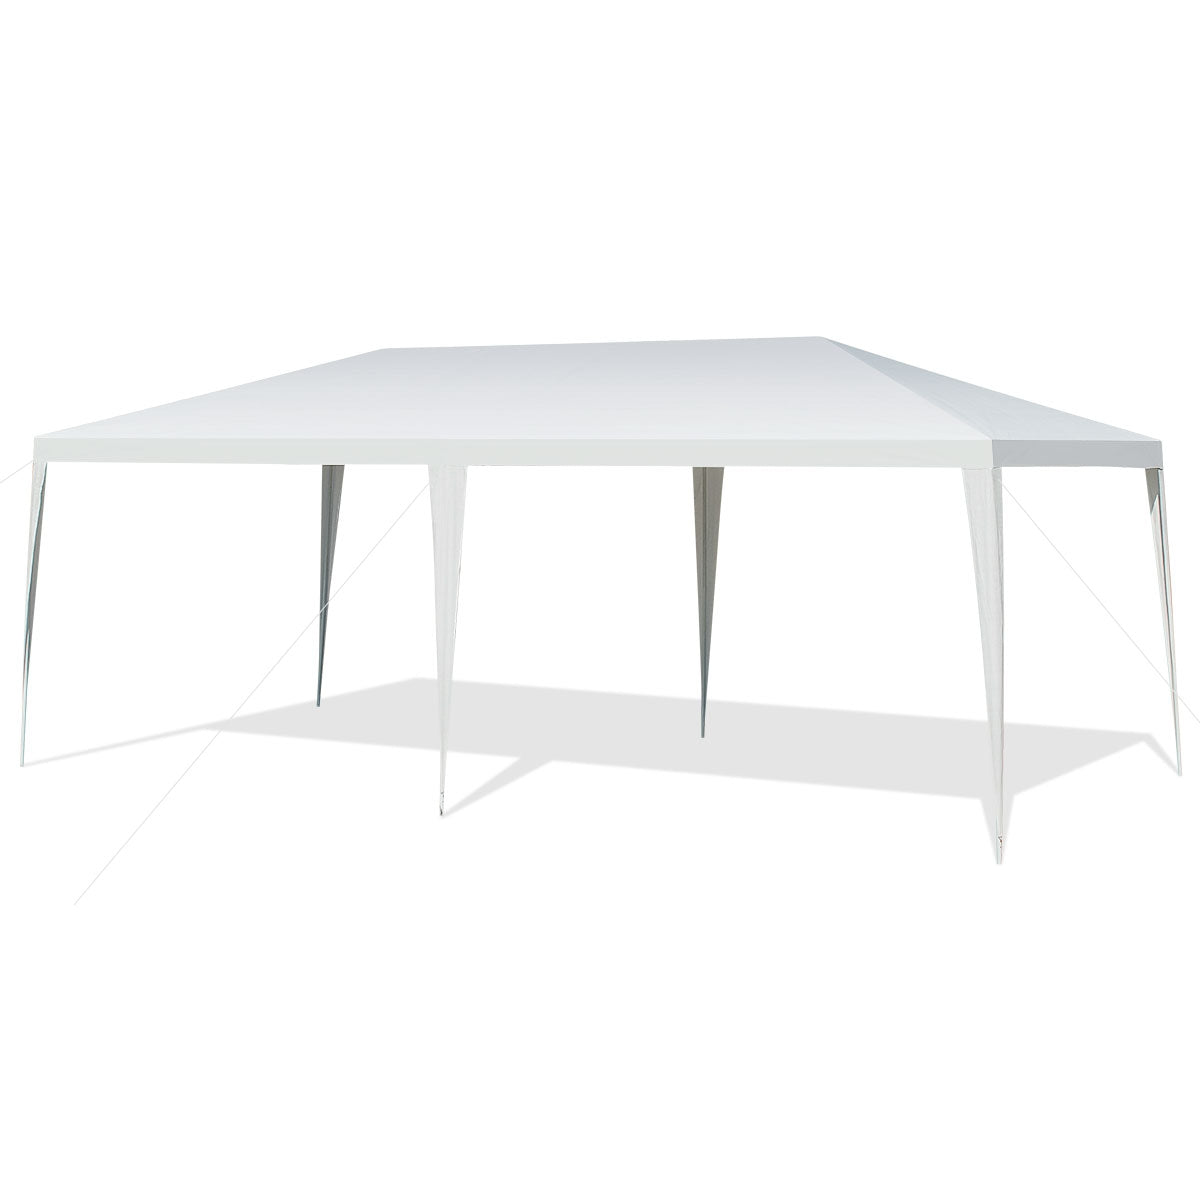 10 x 20 Feet Waterproof Canopy Tent with Wind Rope and Tent Peg